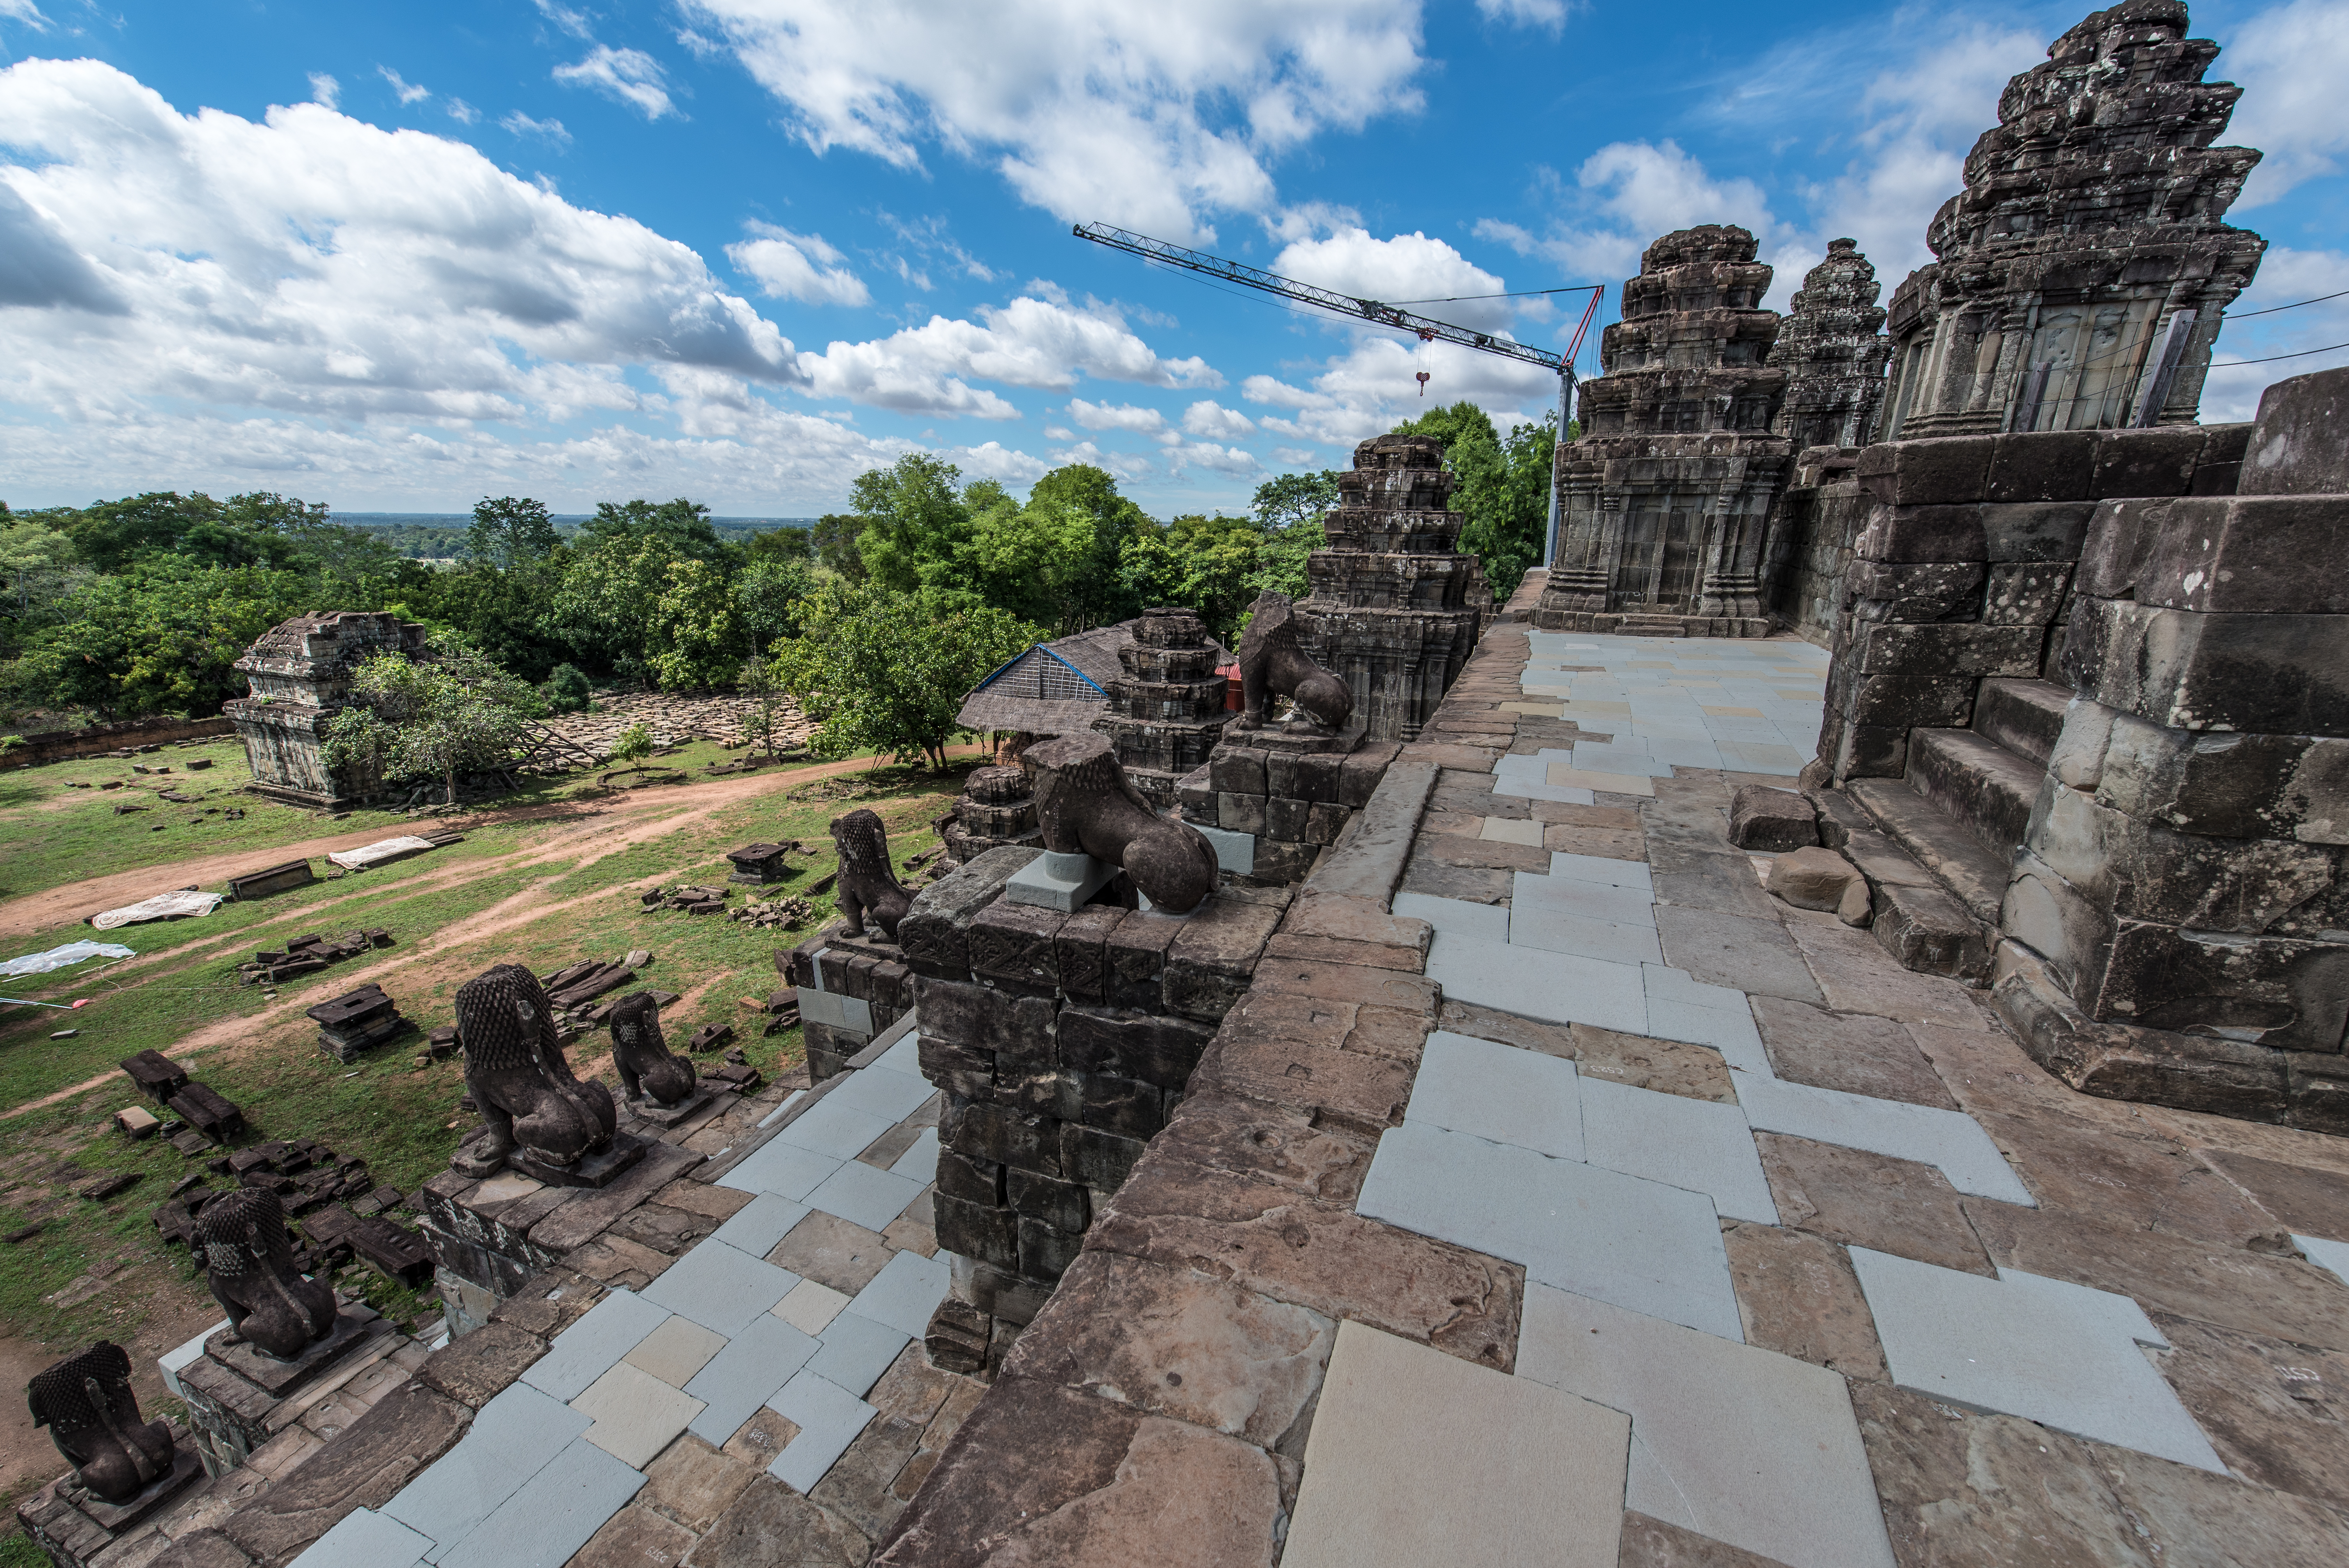 A view of the conserved eastern half of Phnom Bakheng. Photo by Amine Birdouz.